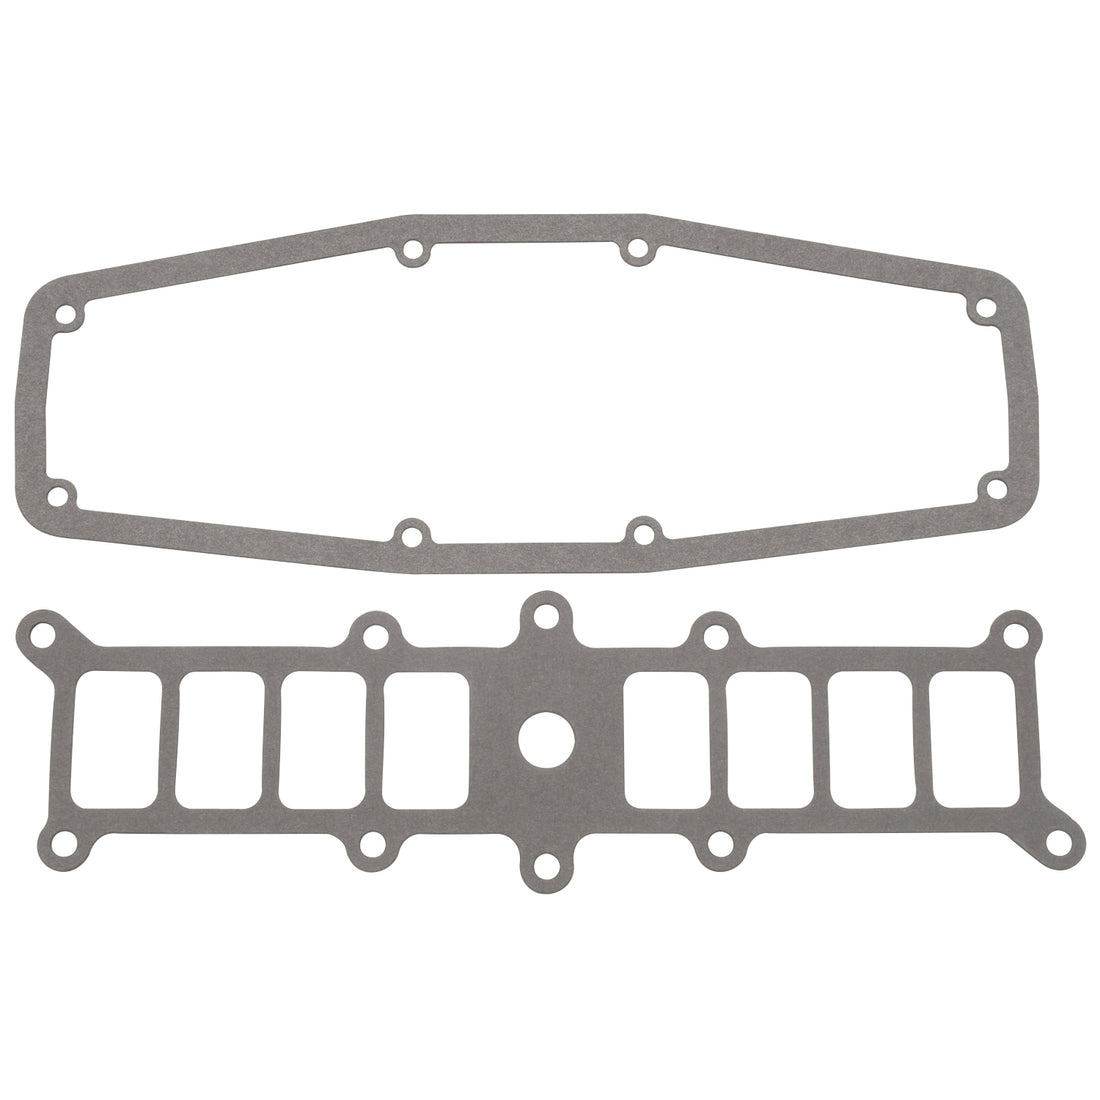 Intake Manifold replacement base and upper plenum gasket for #7126 Edelbrock